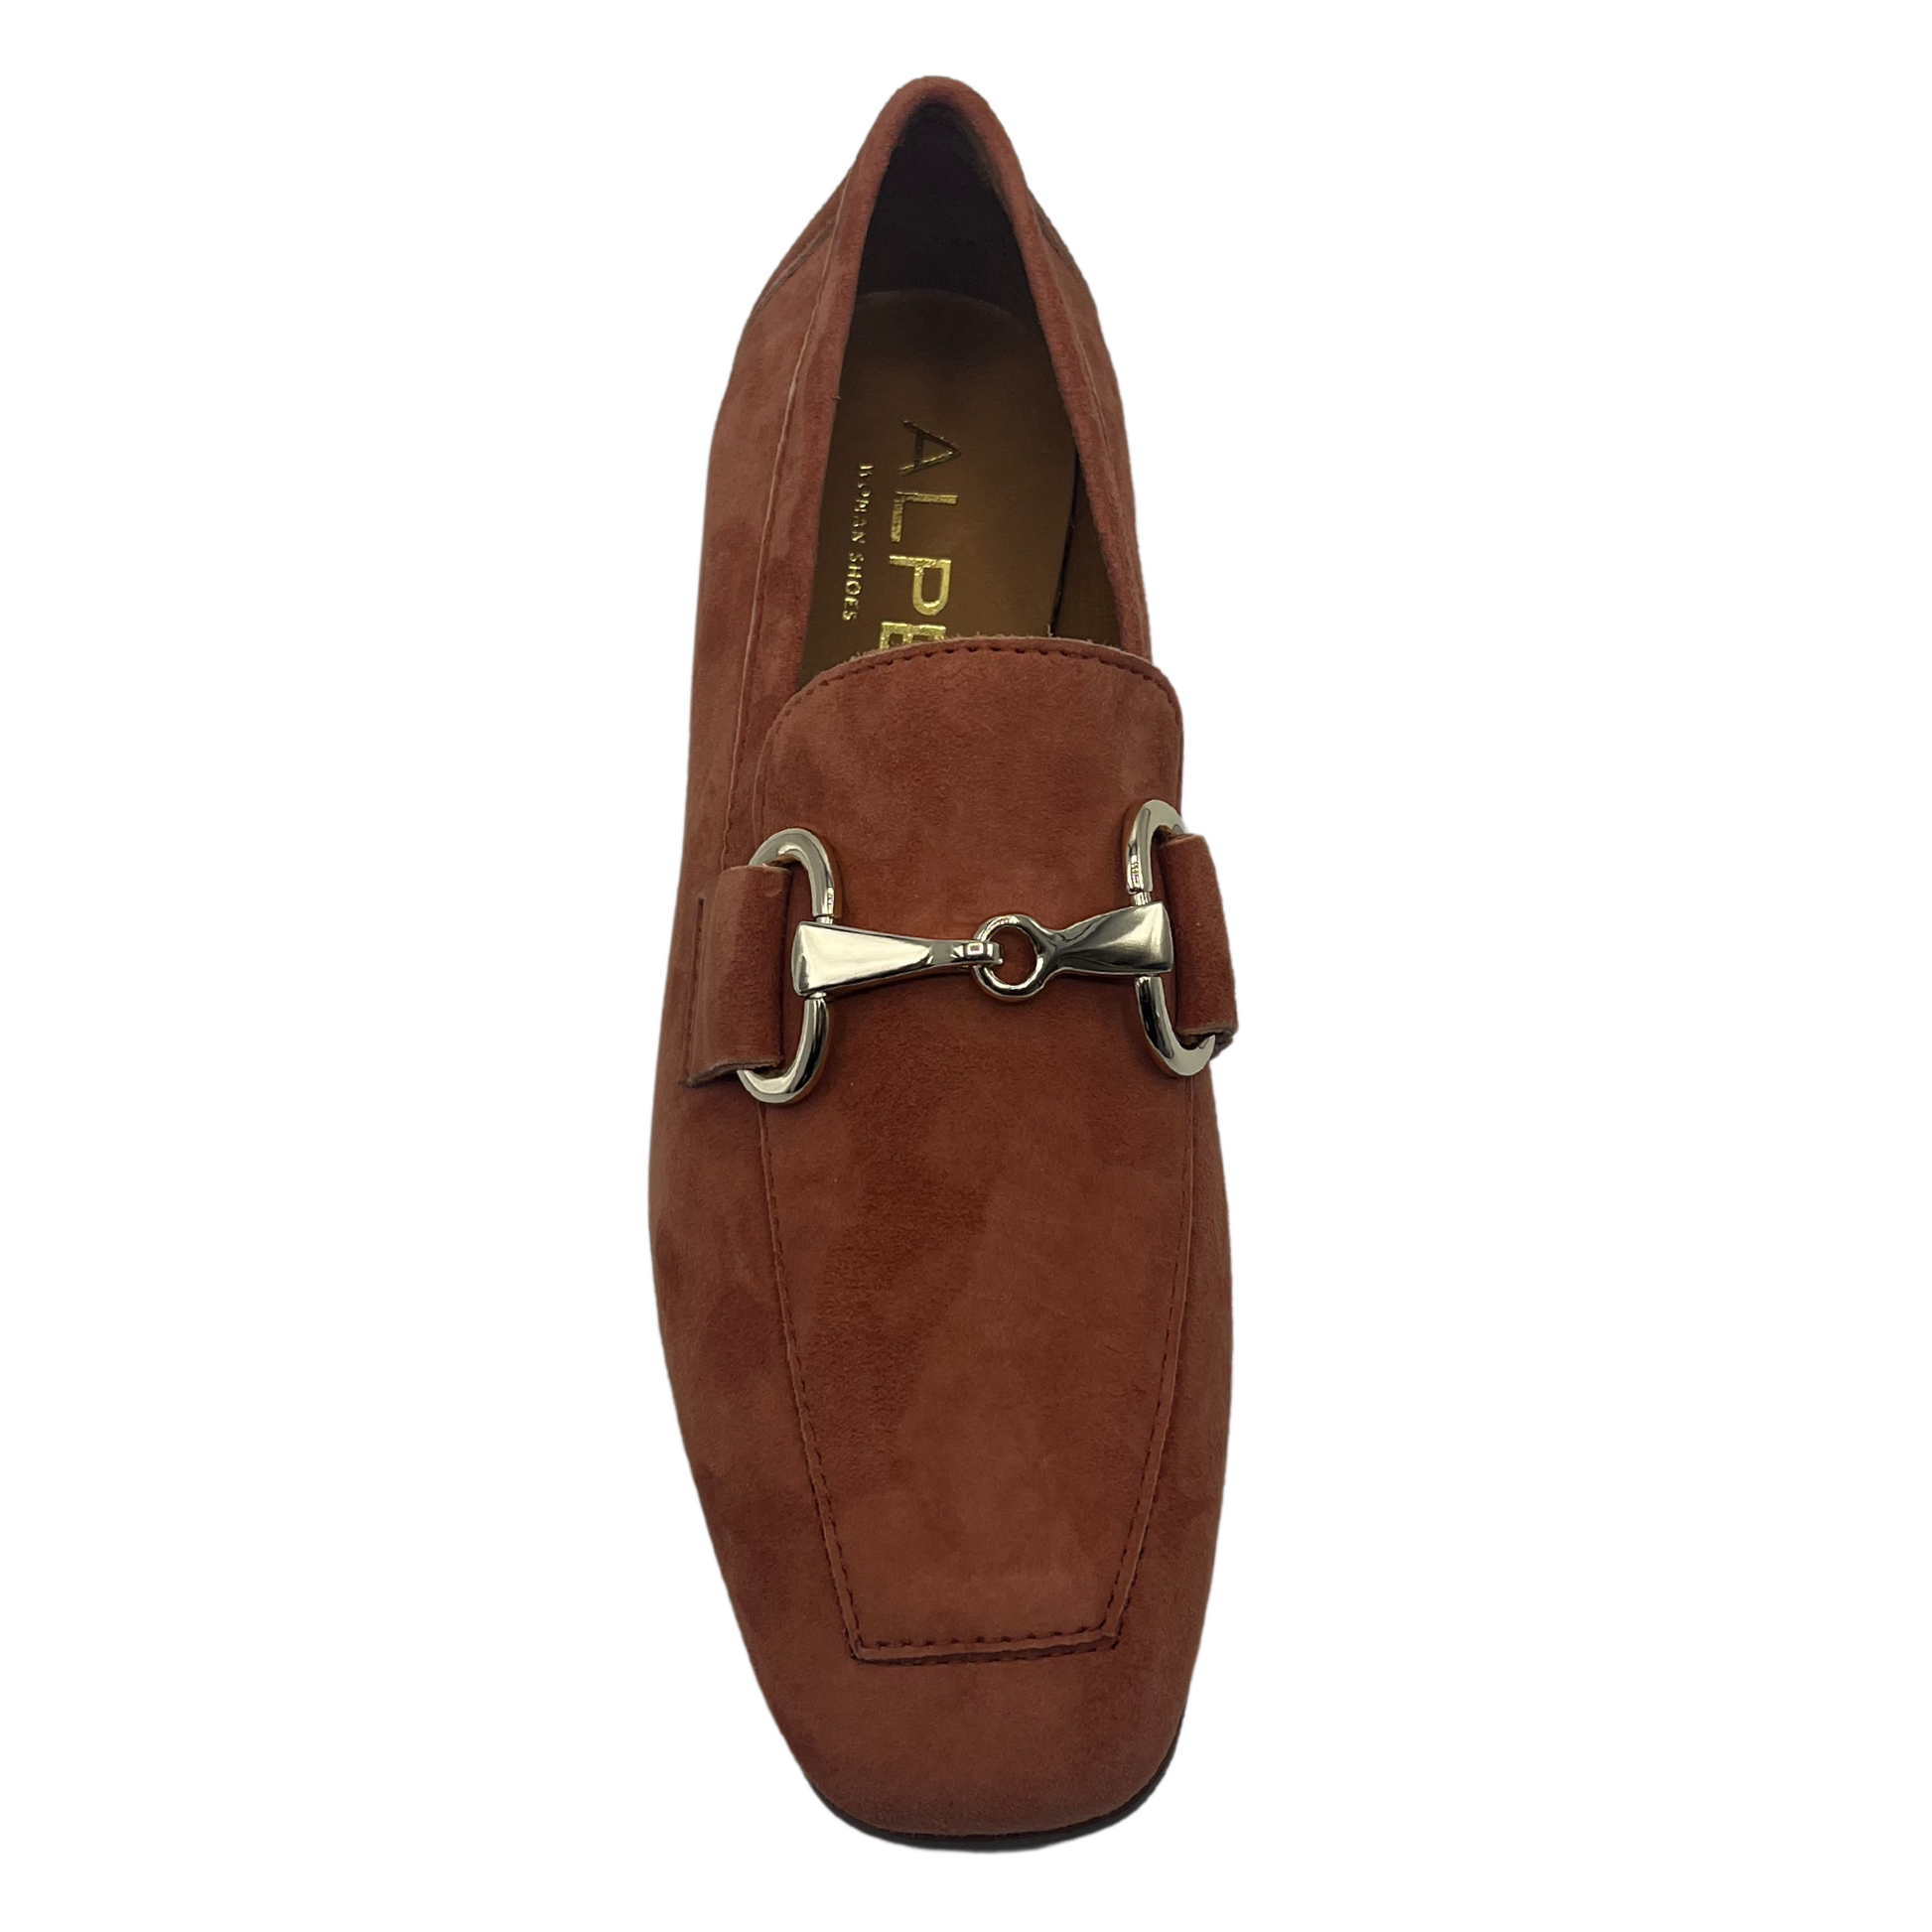 Top  view of red brown suede loafer with silver bit detail on upper, square toe and low heel